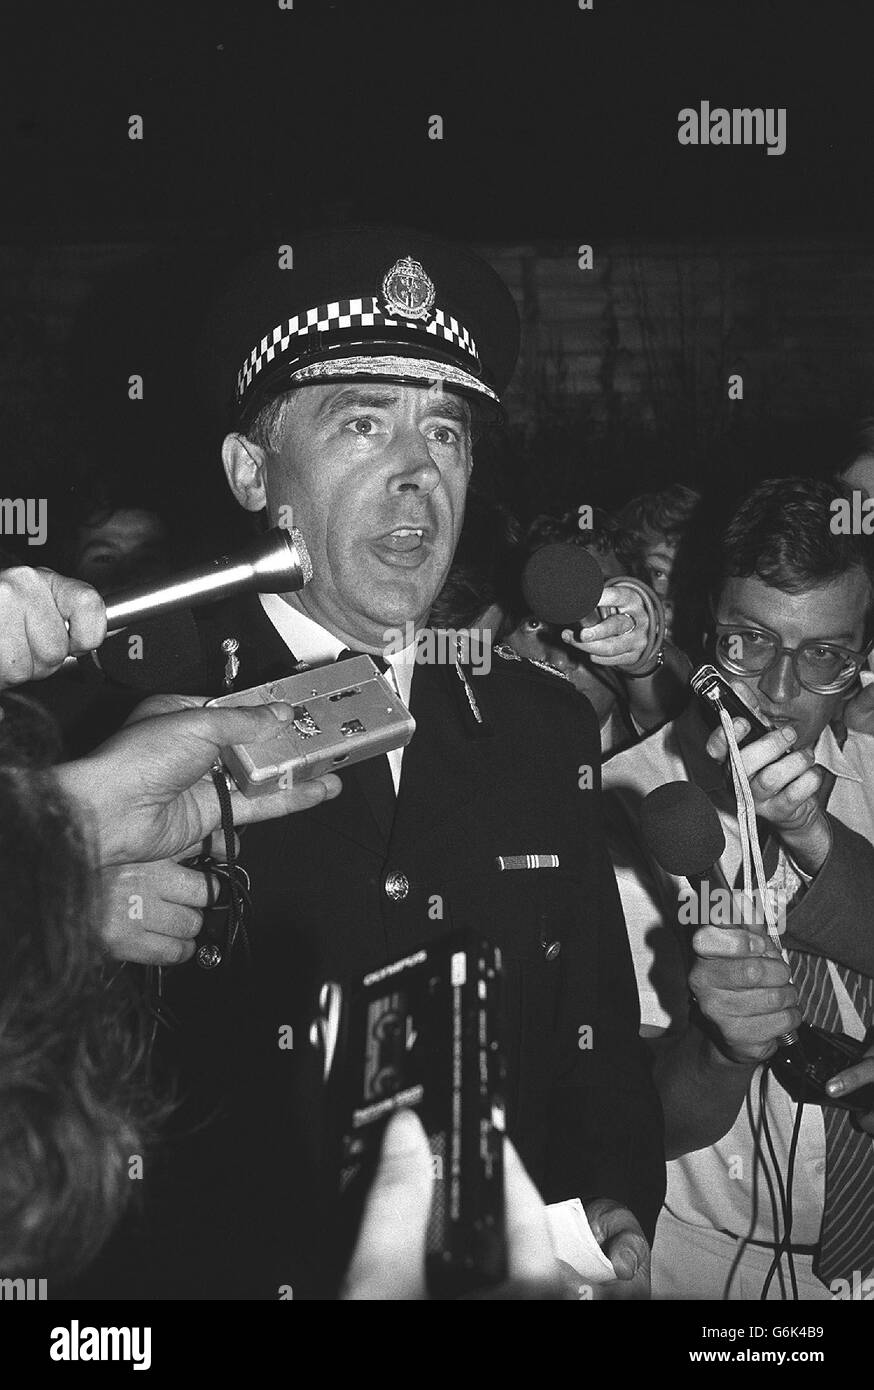 The Chief Constable of Thames Valley Police, Colin Smith, talks to news reporters summing up the events following the Hungerford massacre, where 14 people were shot dead by Michael Ryan. Stock Photo